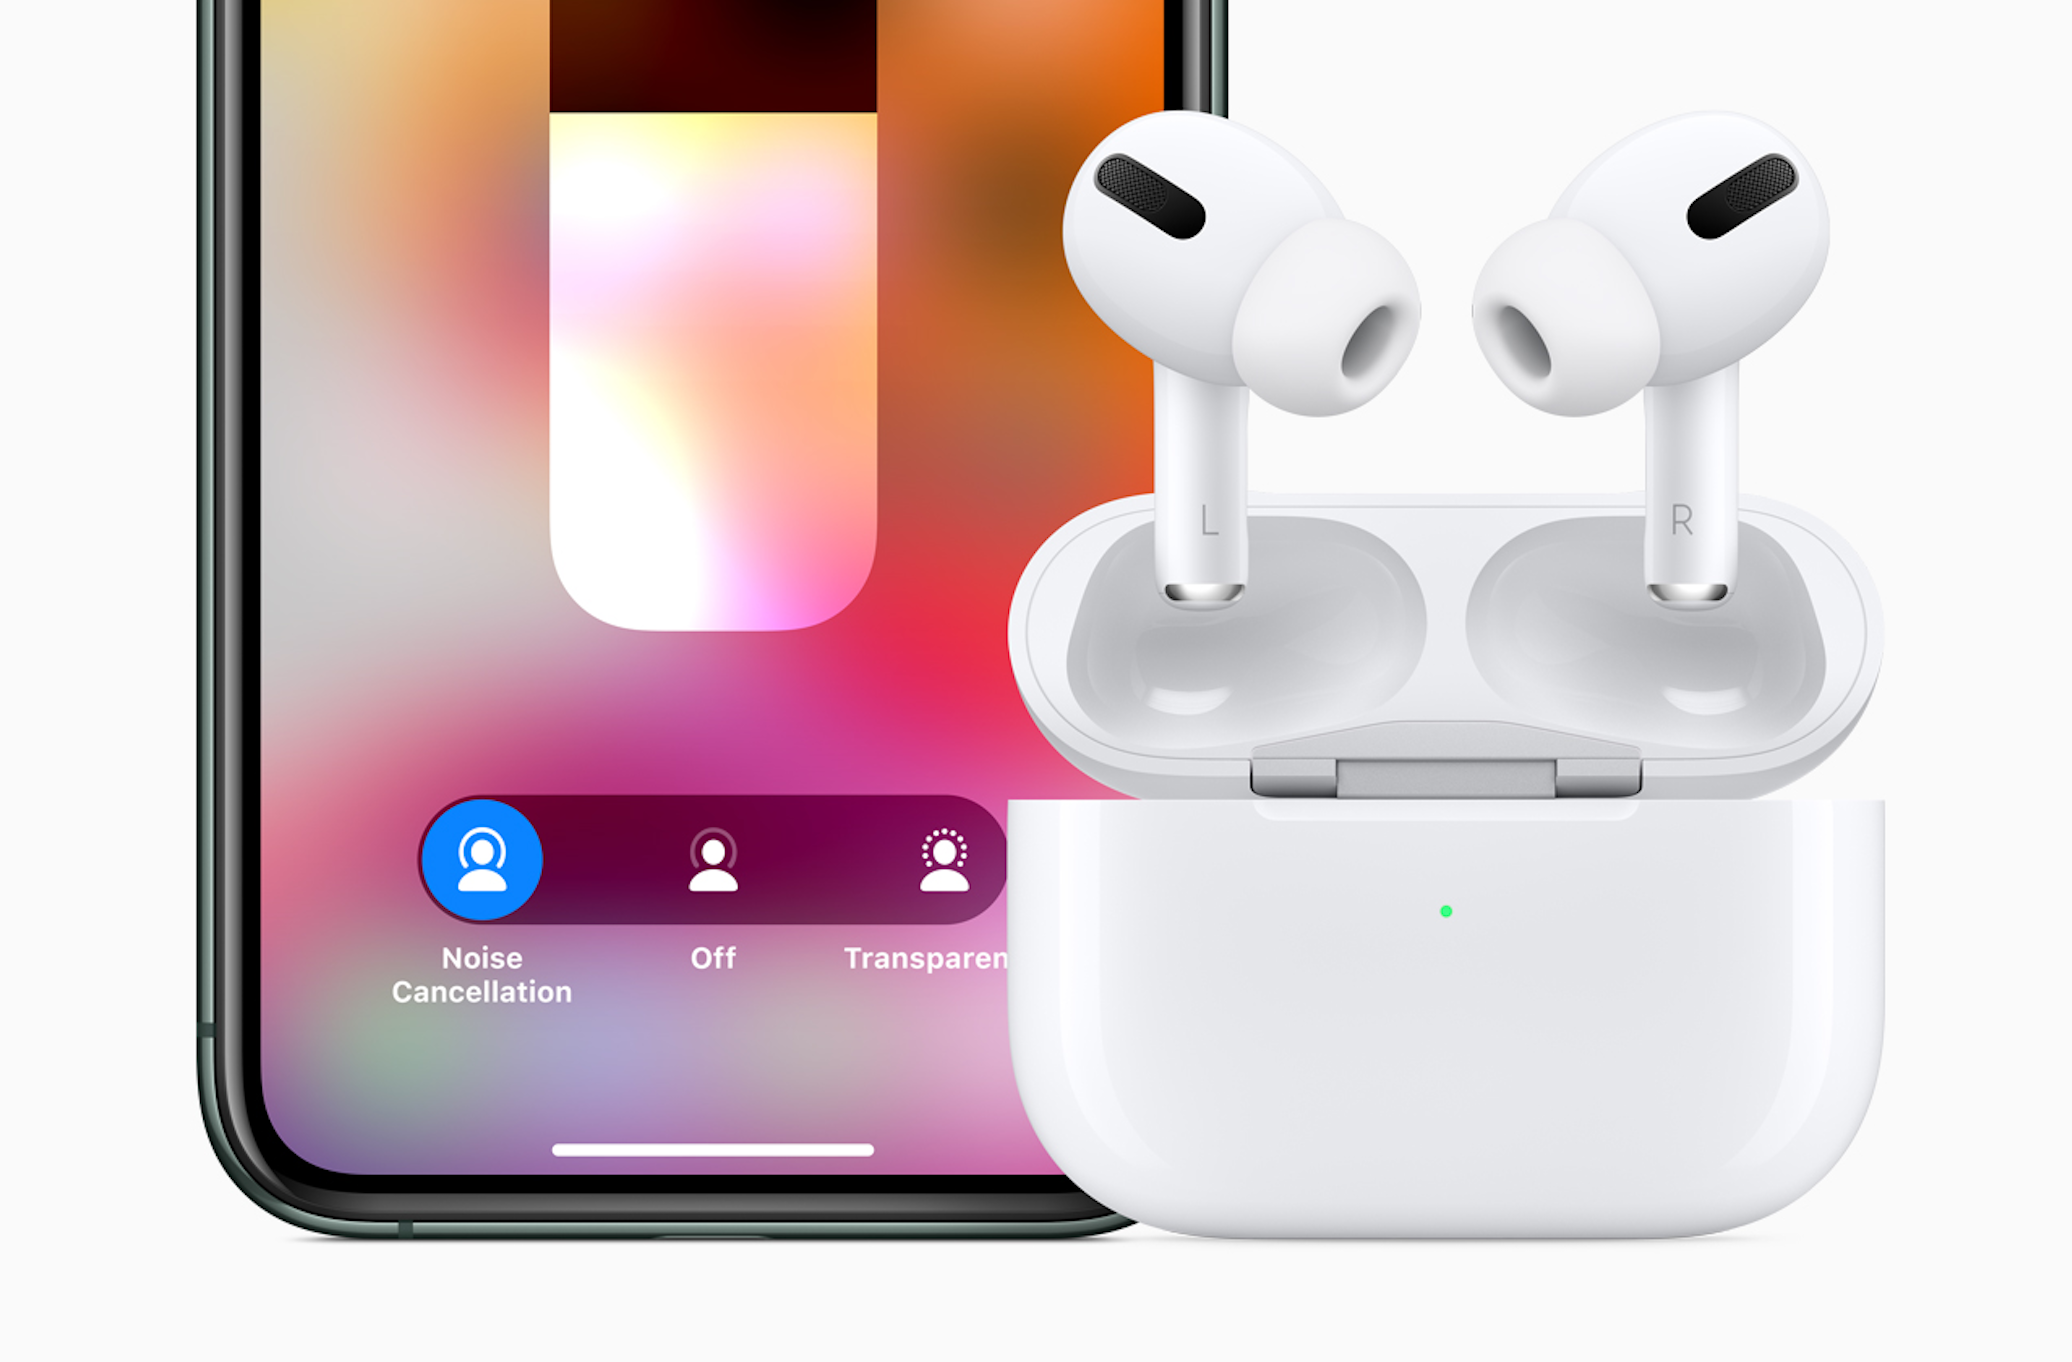 Apple AirPods Pros